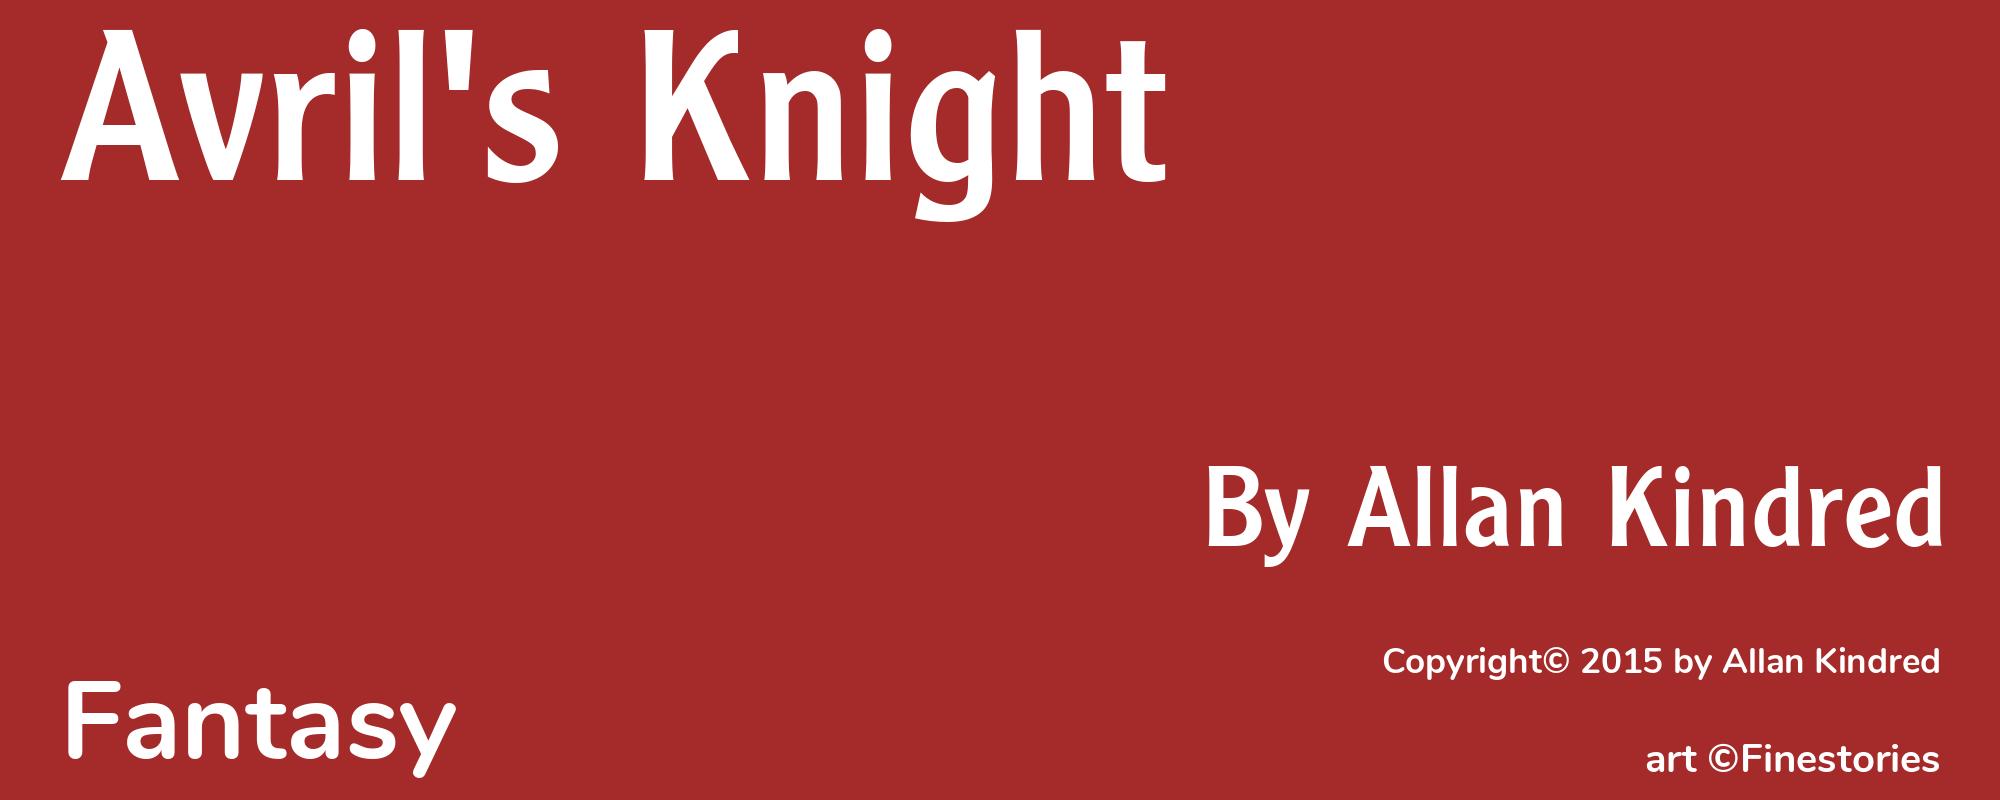 Avril's Knight - Cover